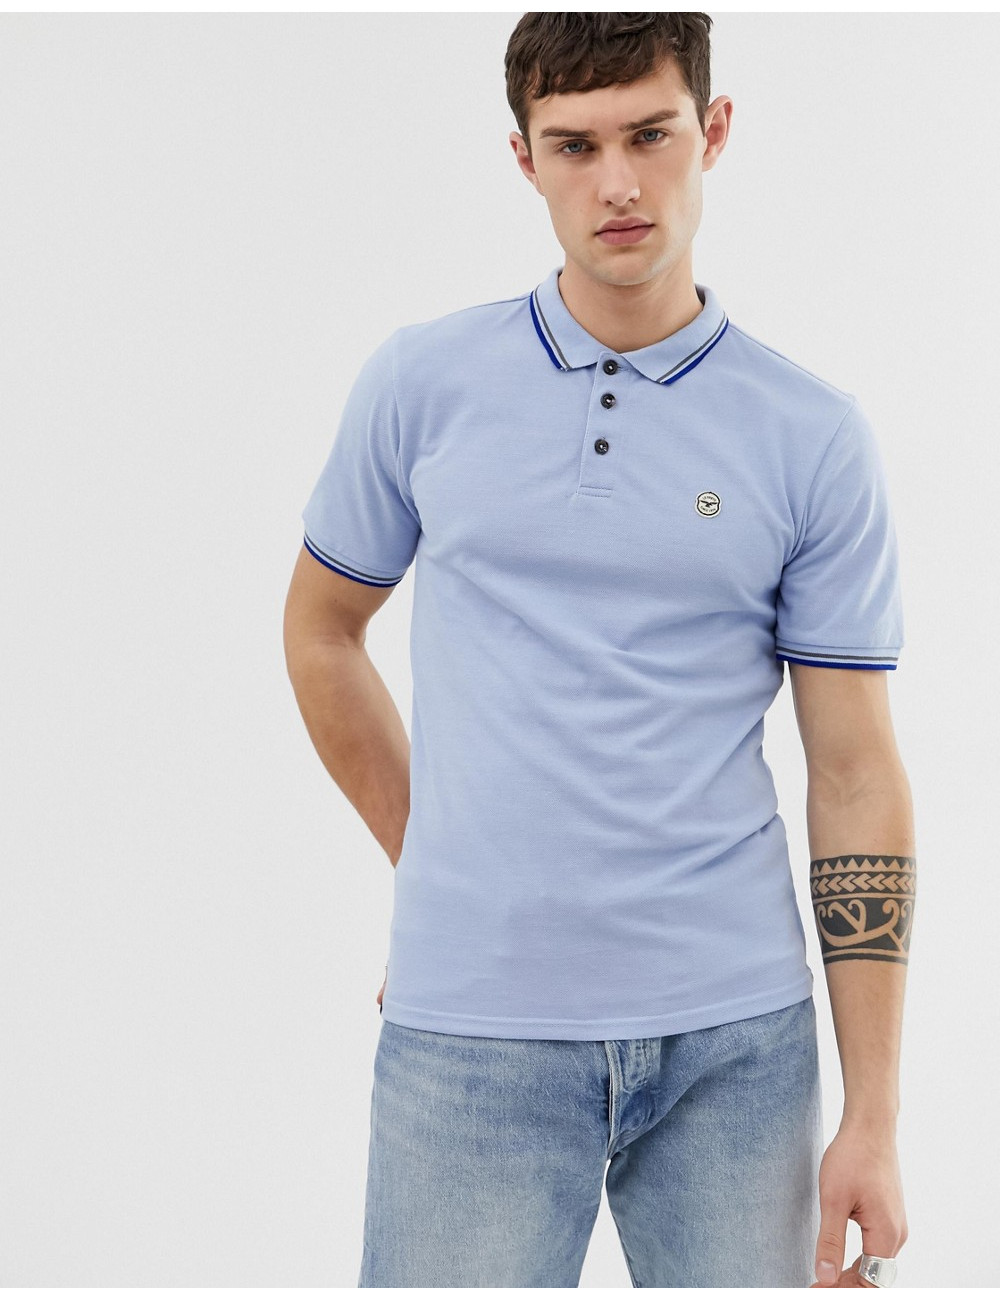 Le Breve tipped polo shirt